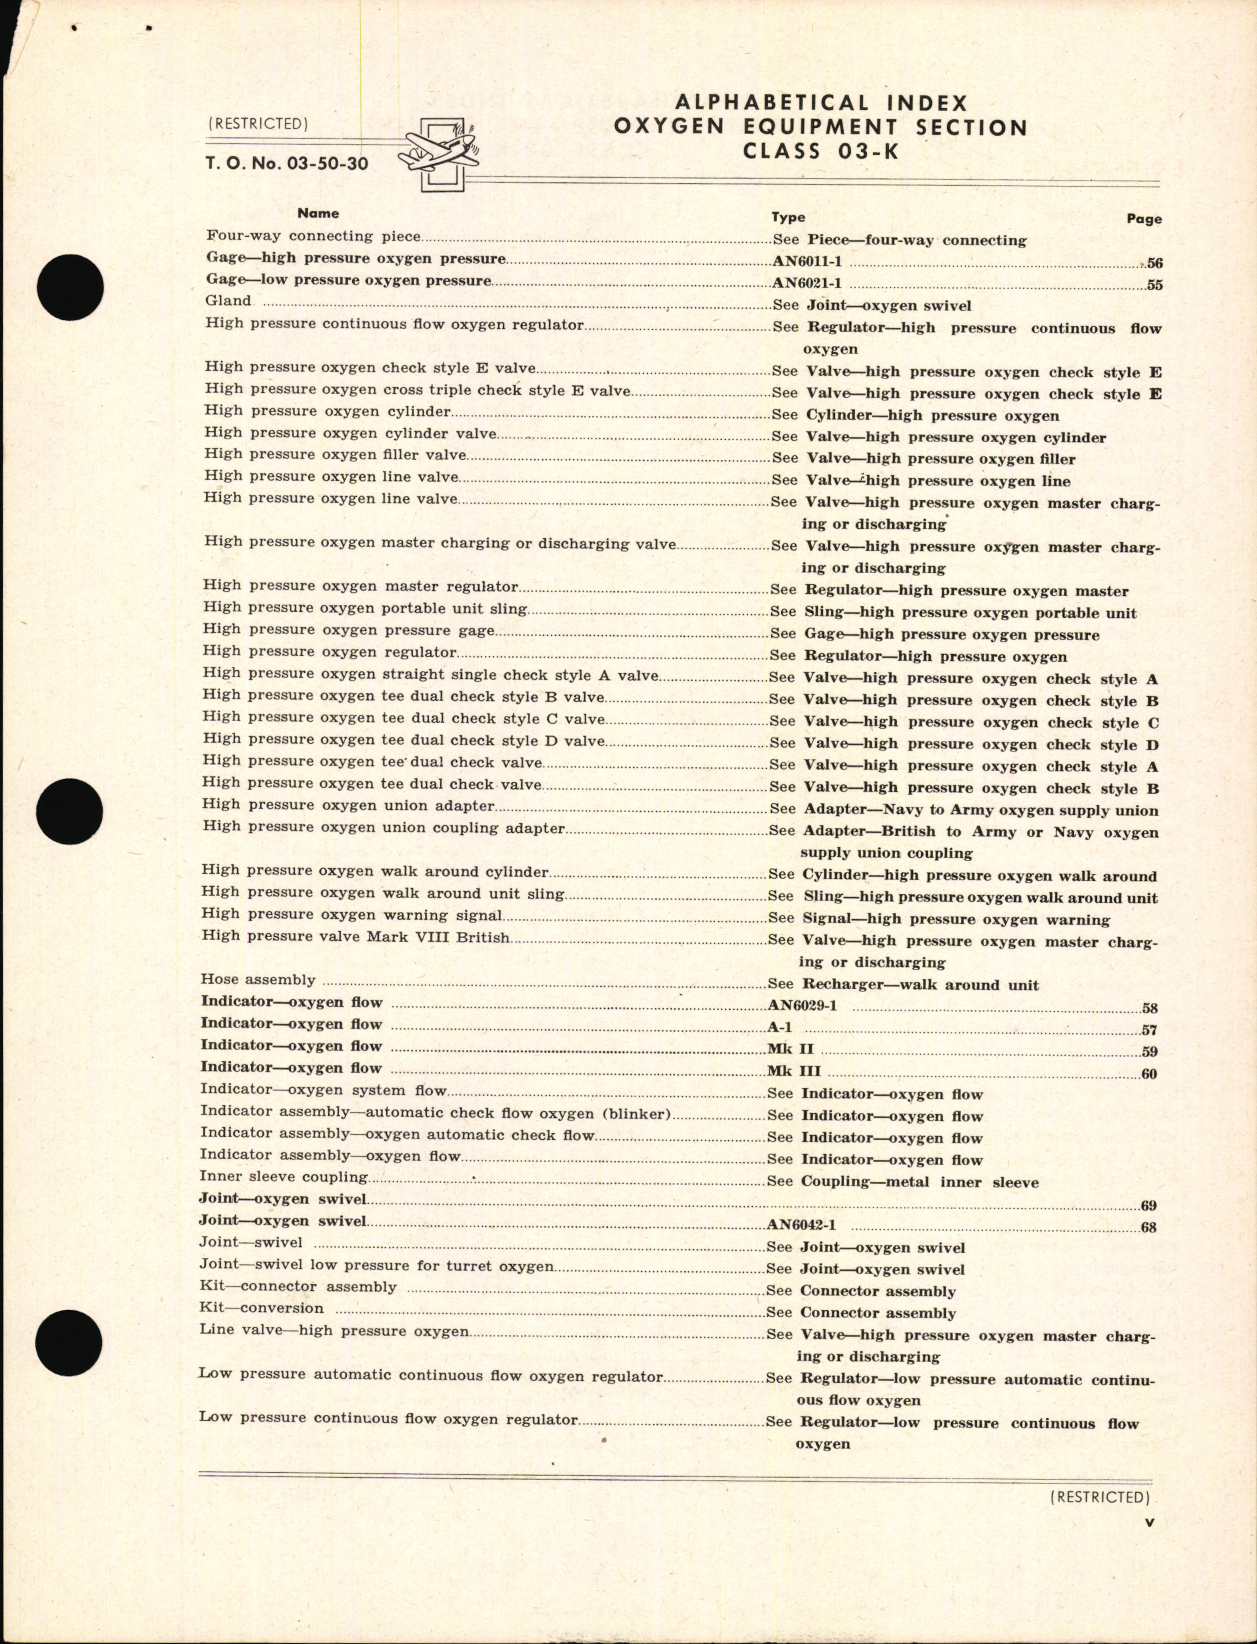 Sample page 7 from AirCorps Library document: Index of Army-Navy Aeronautical Equipment - Oxygen